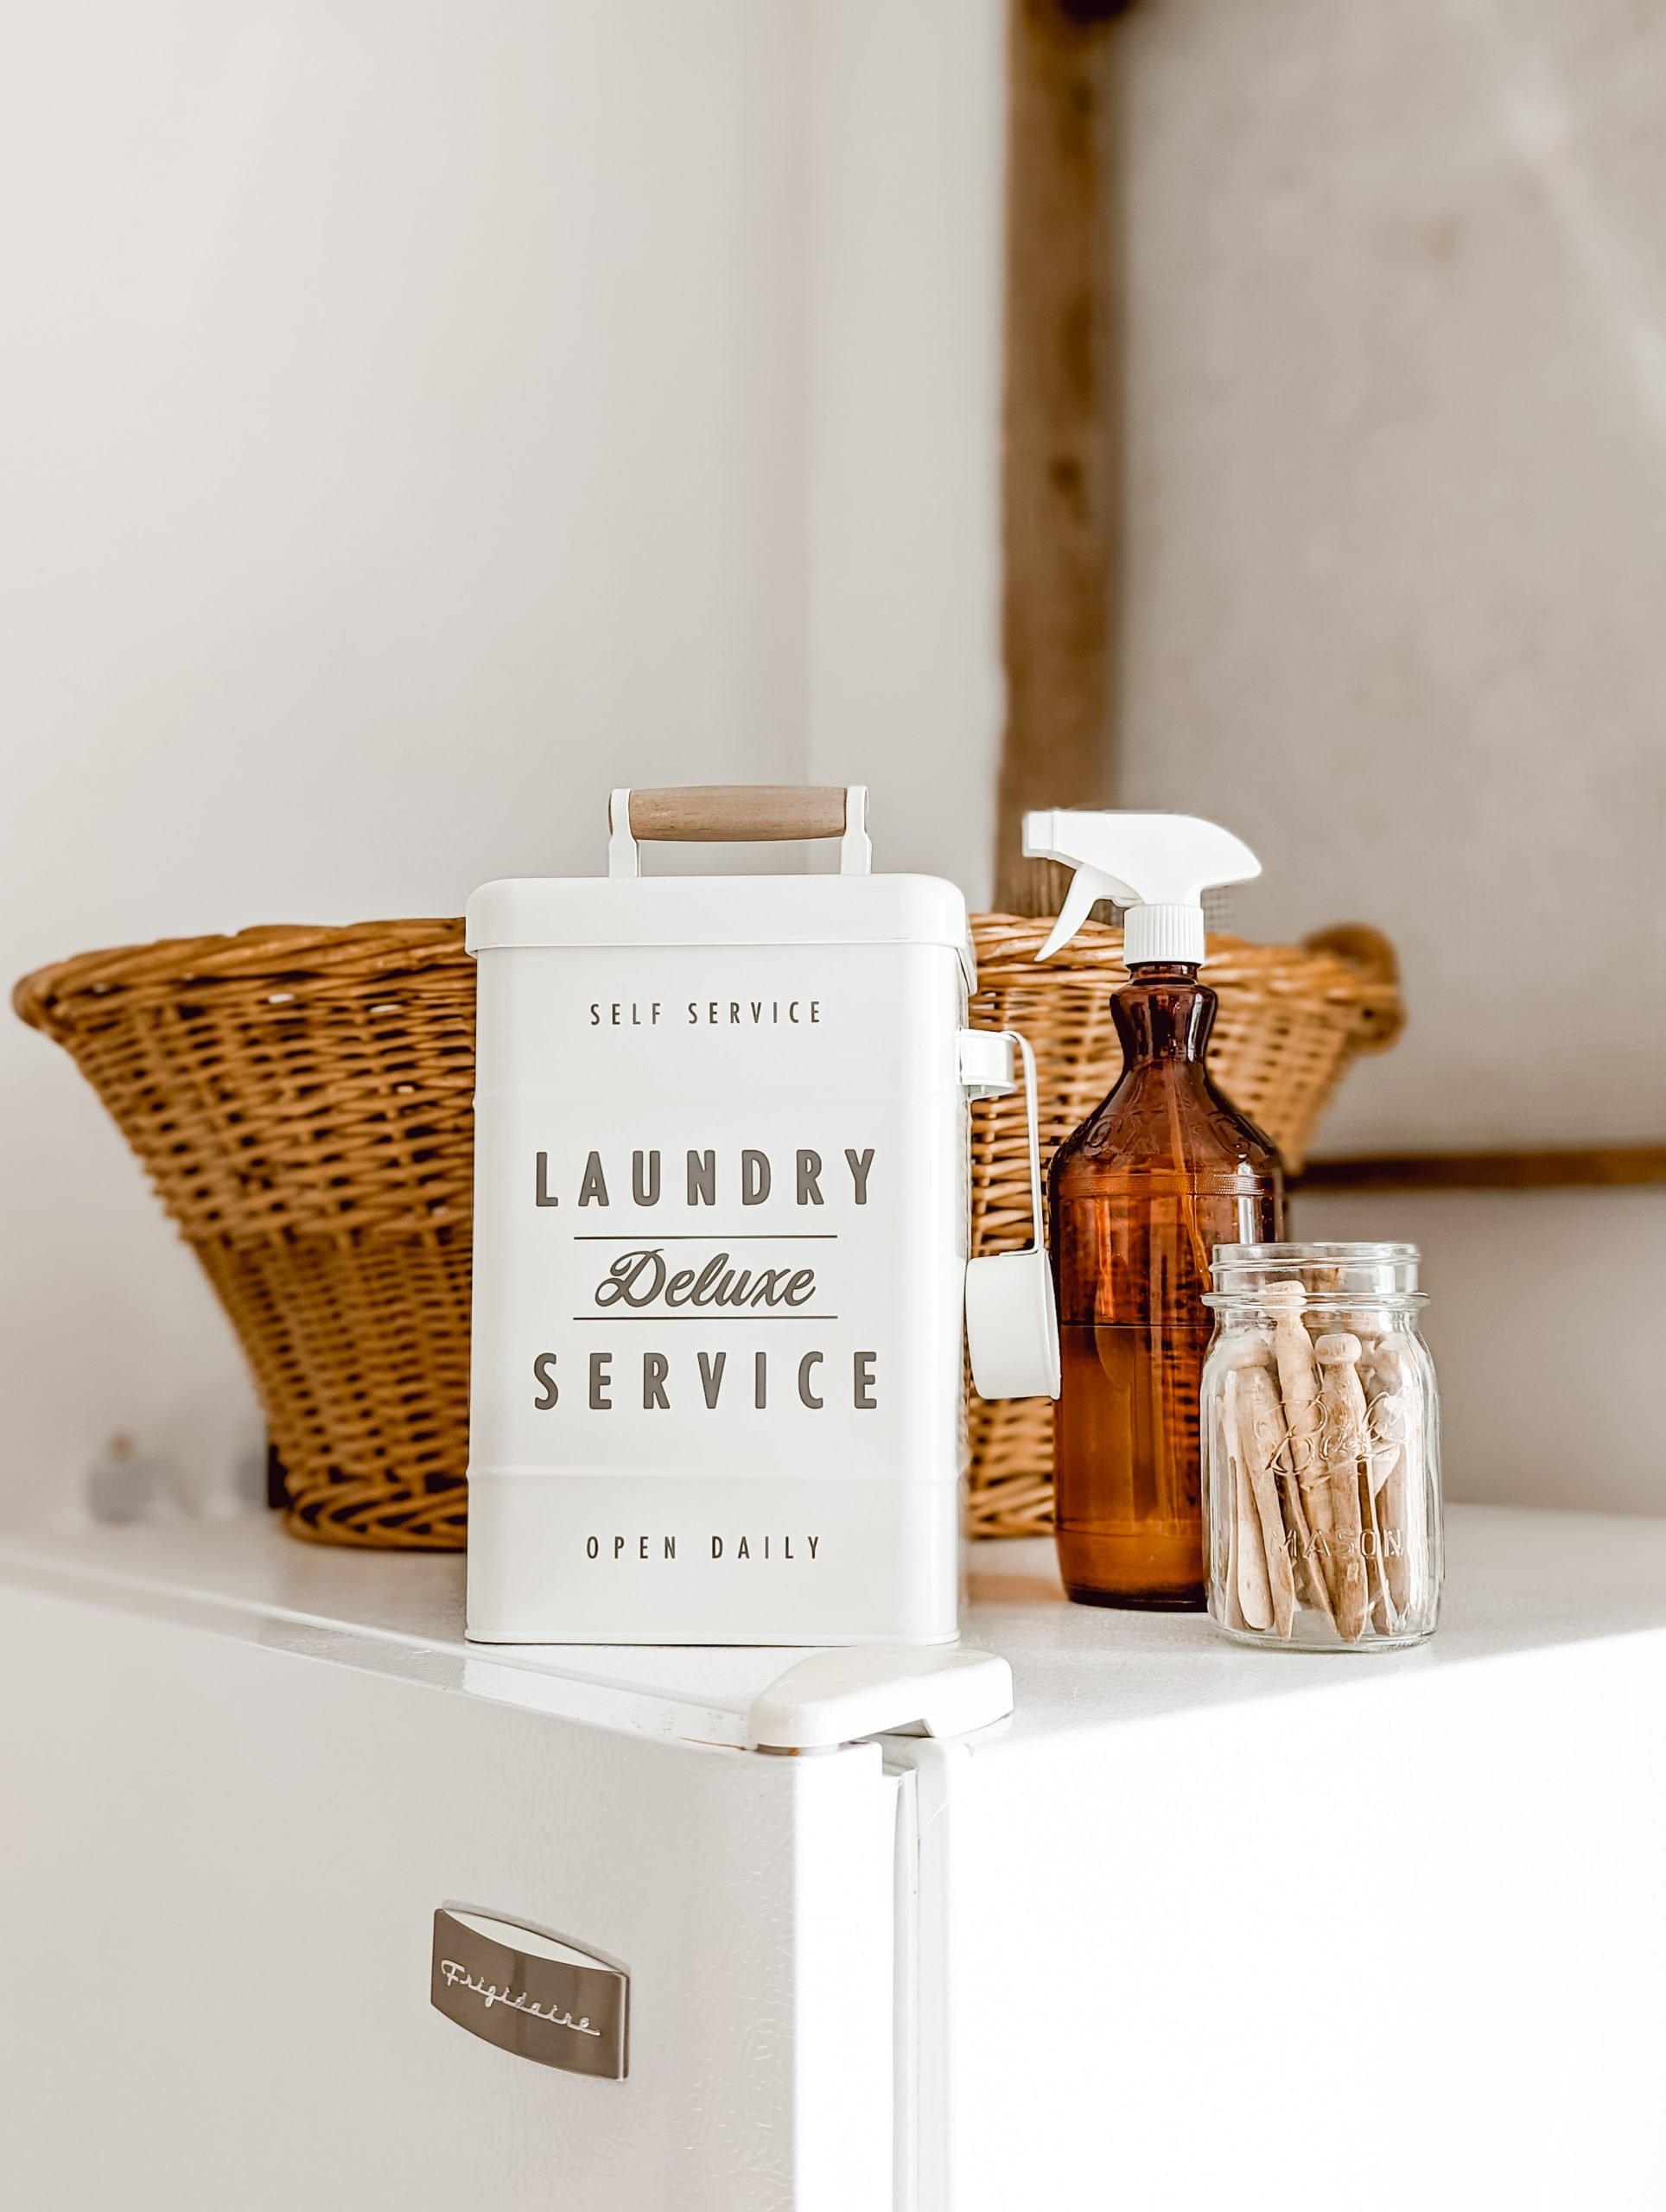 vintage amber glass Clorox bottle repurposed as a laundry stain spray bottle by adding a white spray nozzle